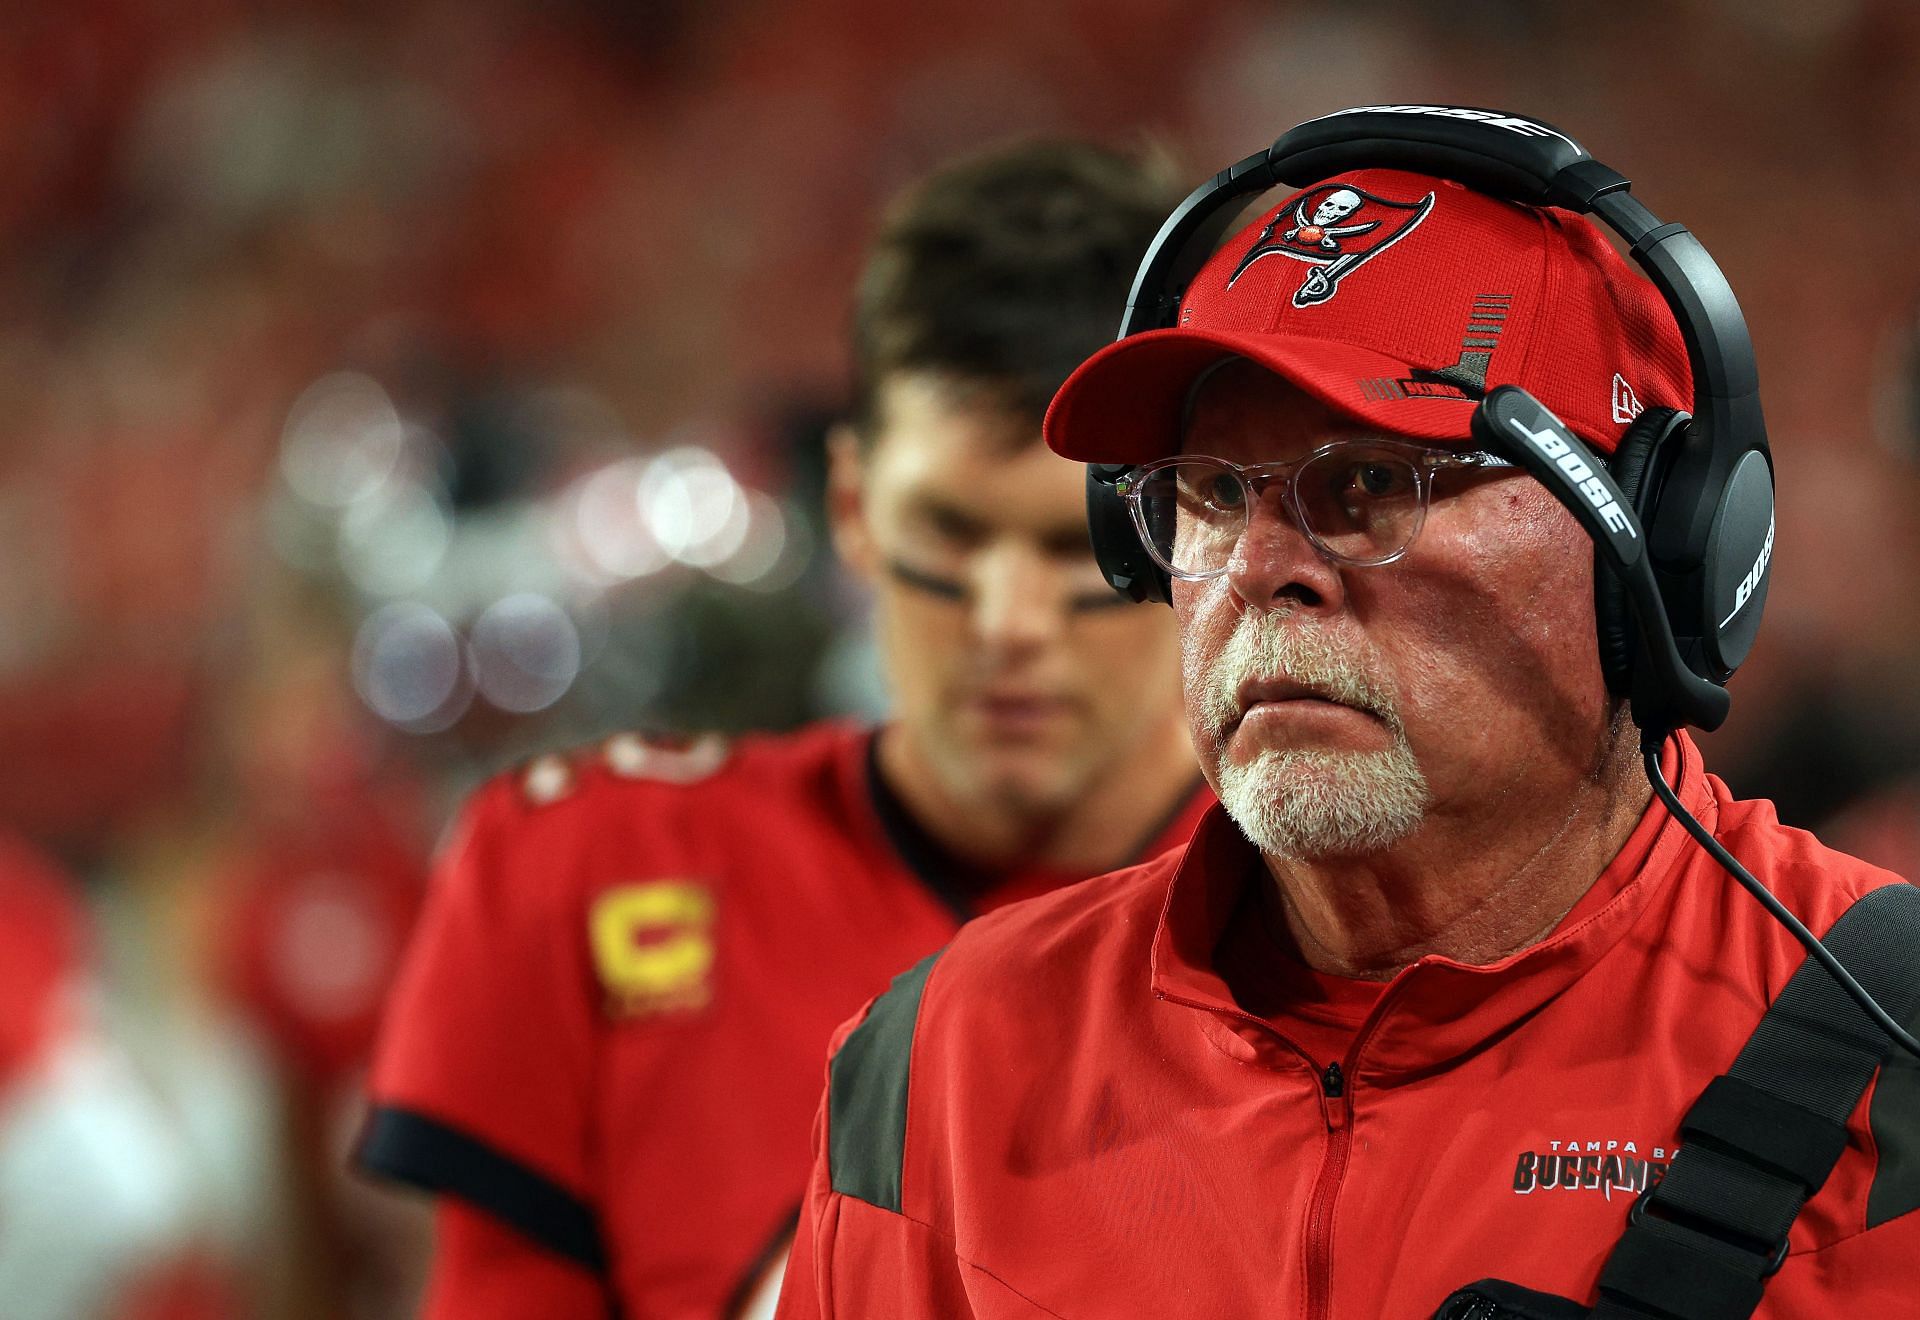 Bruce Arians has decided to step down as head coach of the Tampa Bay Buccaneers